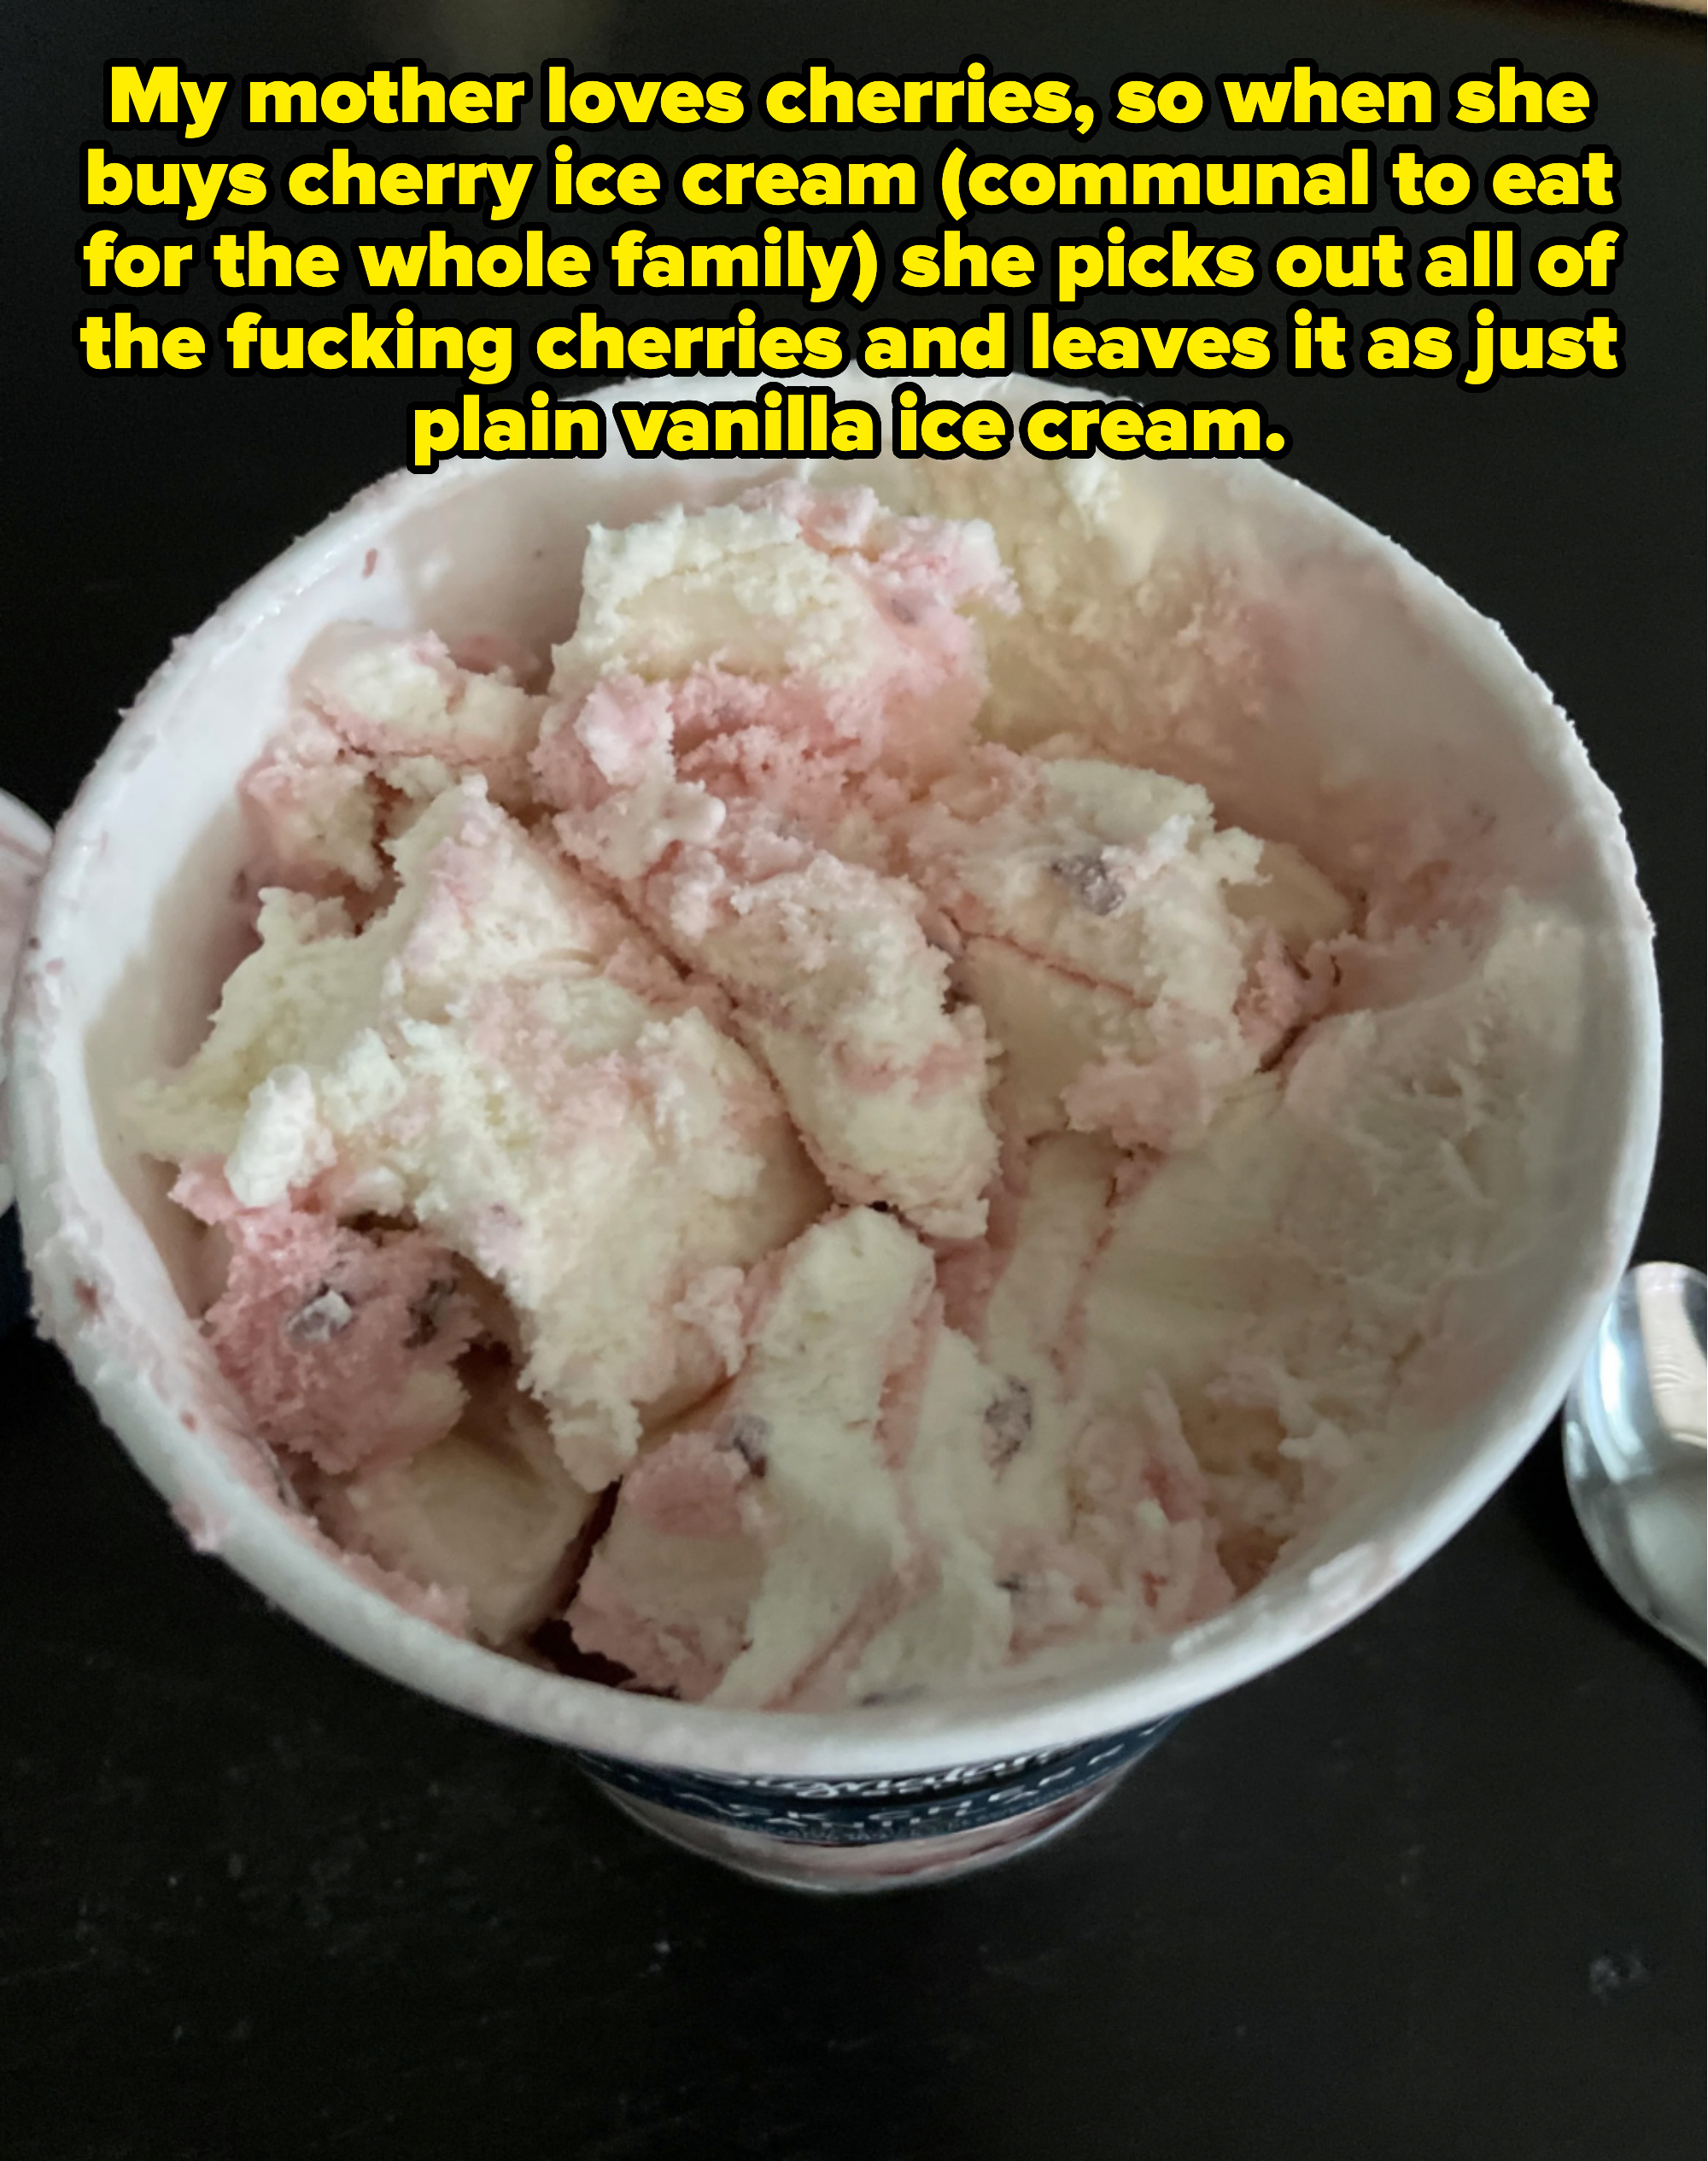 A half-eaten bowl of cherry ice cream with the cherries picked out